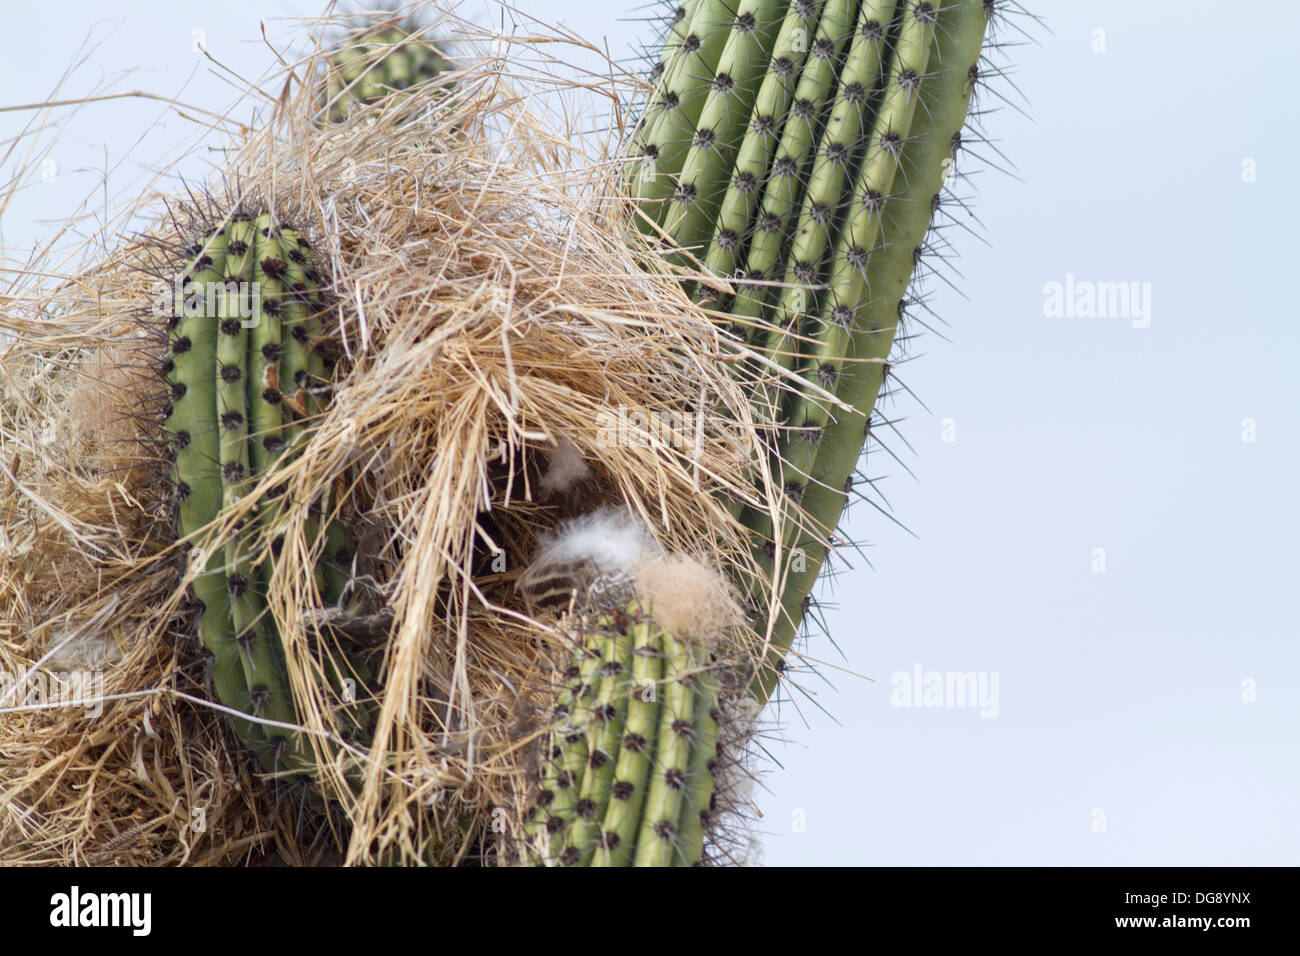 Cactus Wren nest build high in a cactus plant for protection.(Campylorhynchus brunneicapillus).Los Cabos,Mexico Stock Photo